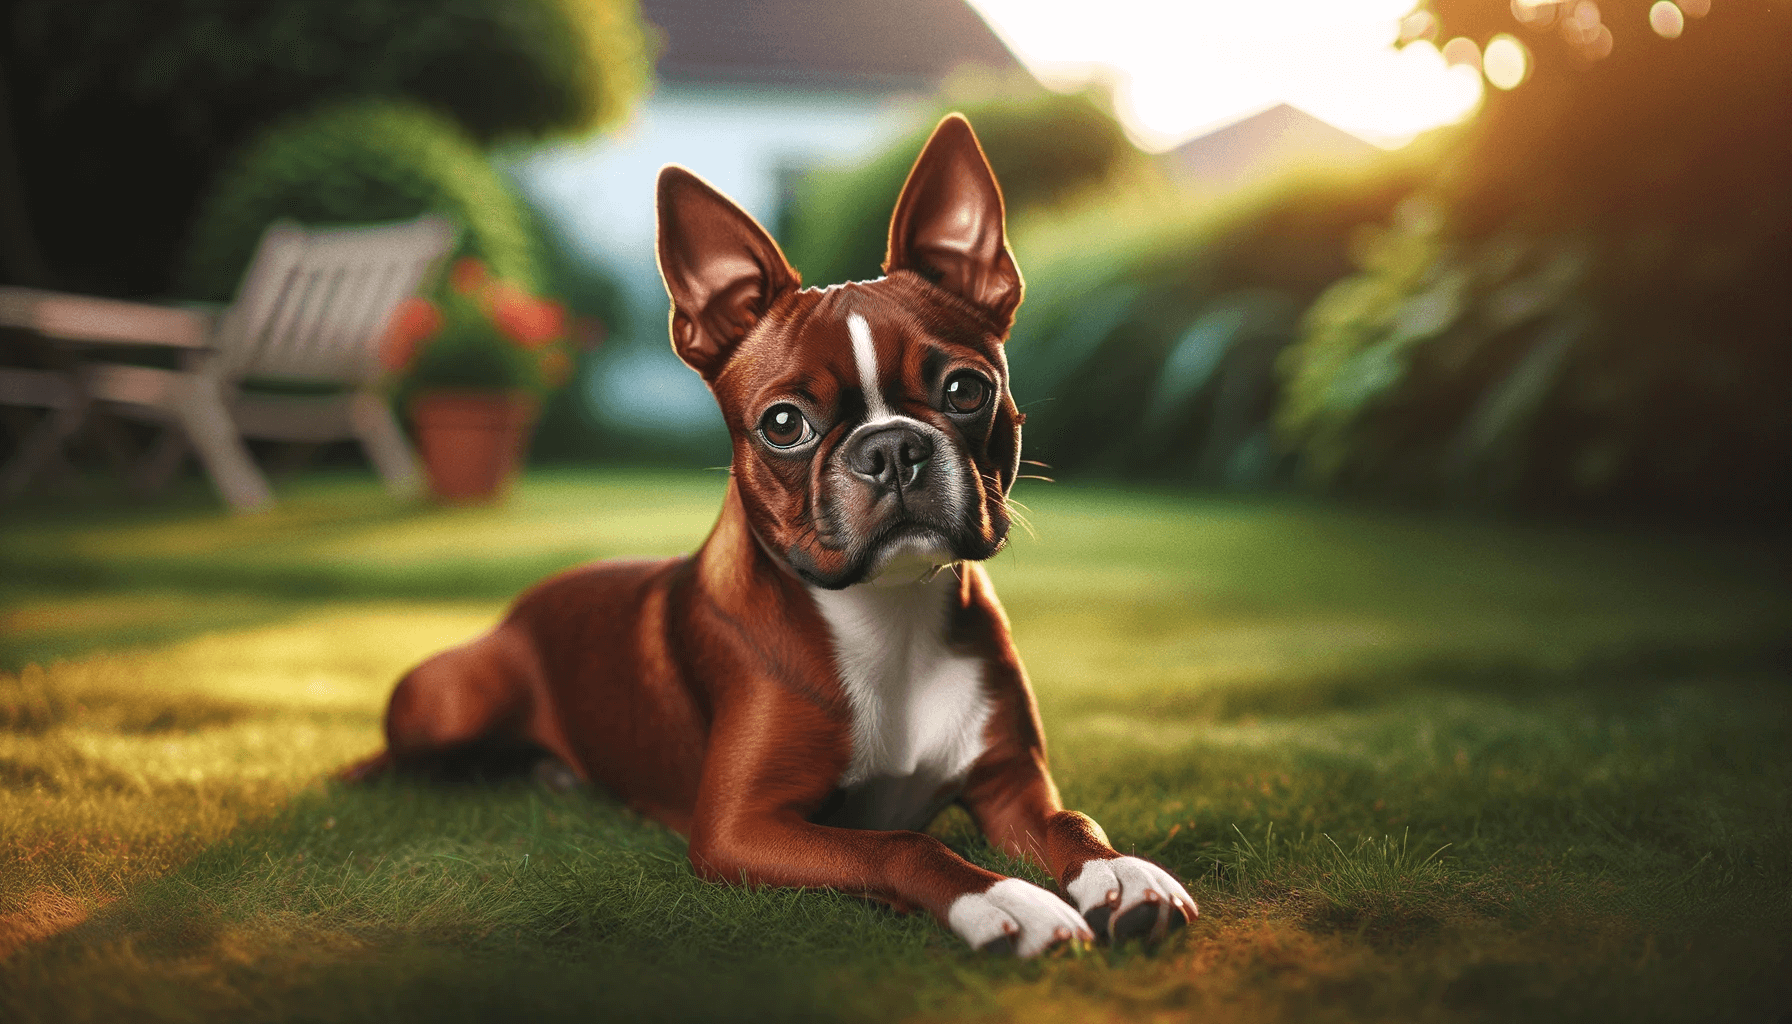 Red Boston Terrier Lying on the Grass in a Relaxed Posture